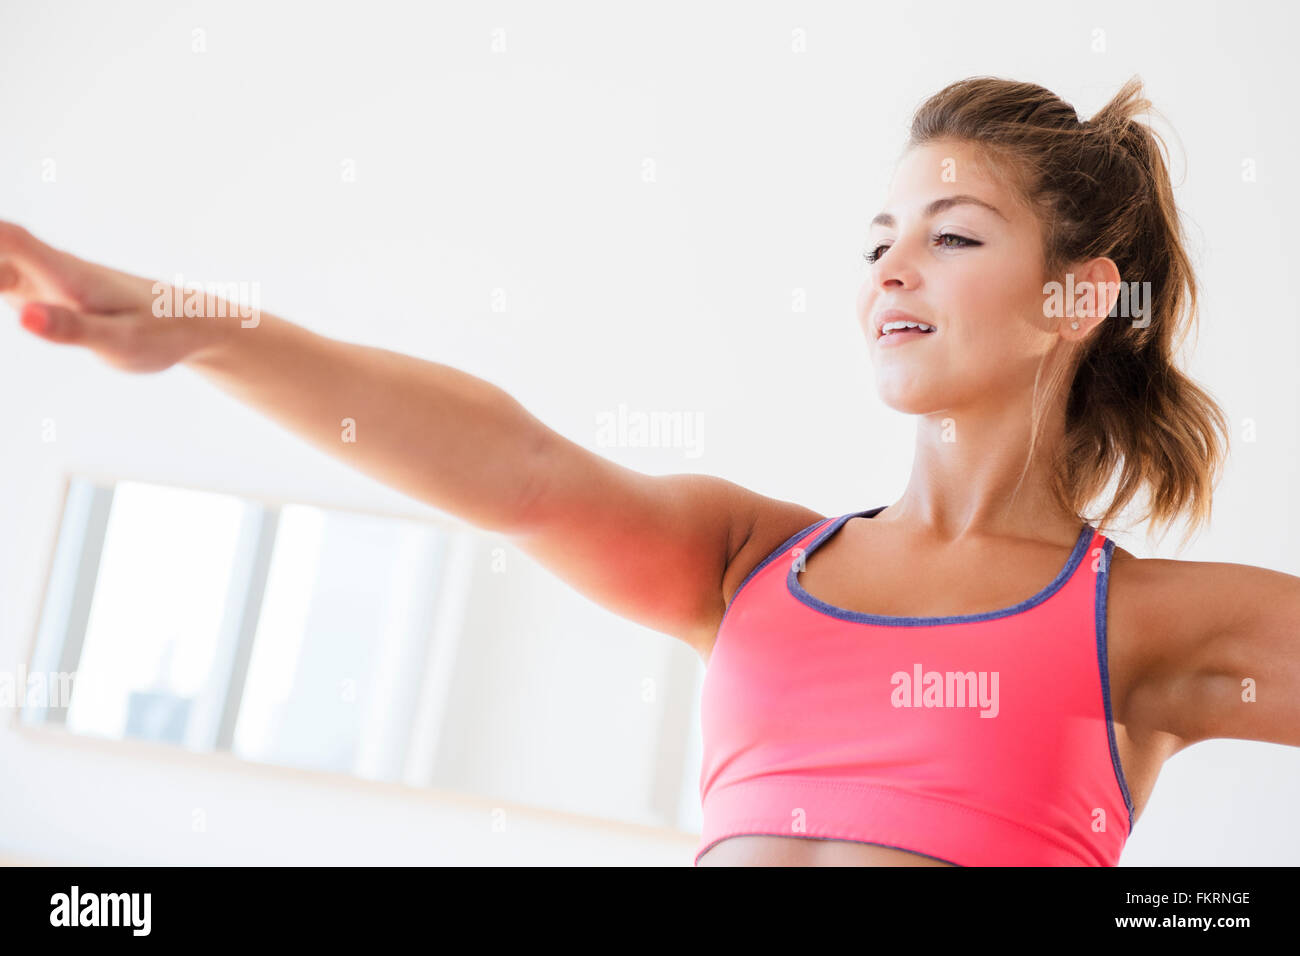 Mixed race woman working out Stock Photo